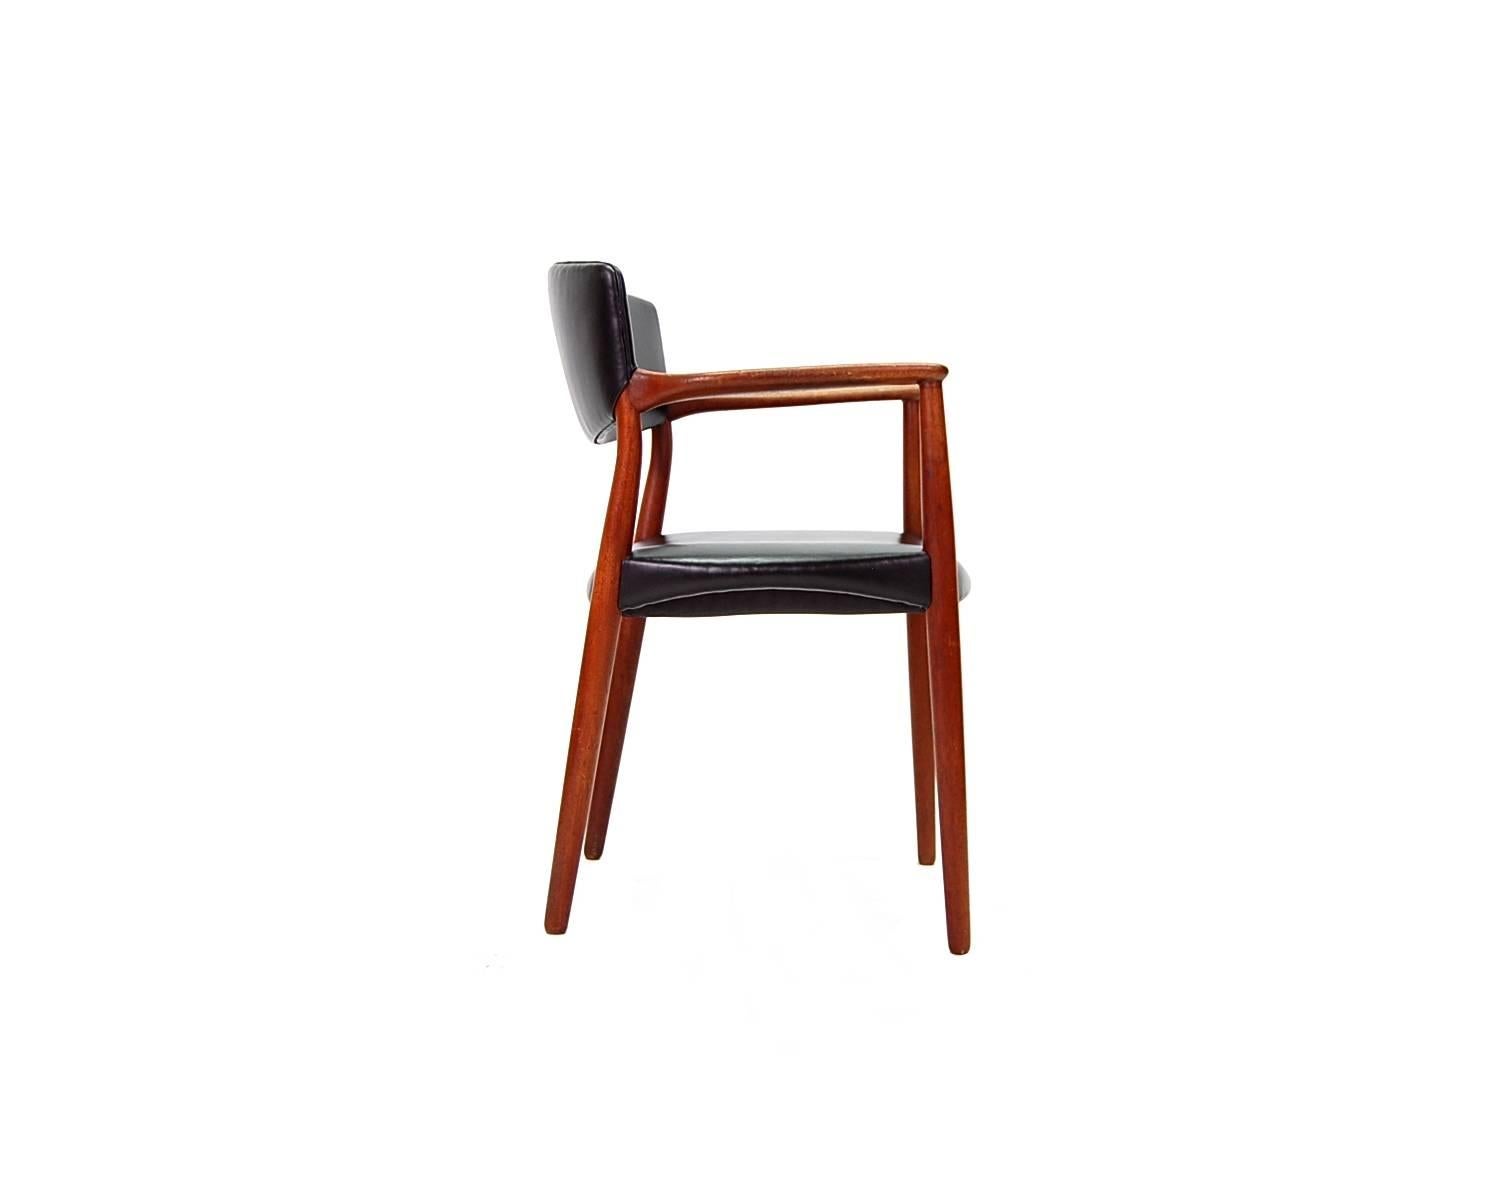 20th Century Armchair in Teak and Black Leather by Ejnar Larsen and Aksel Bender Madsen